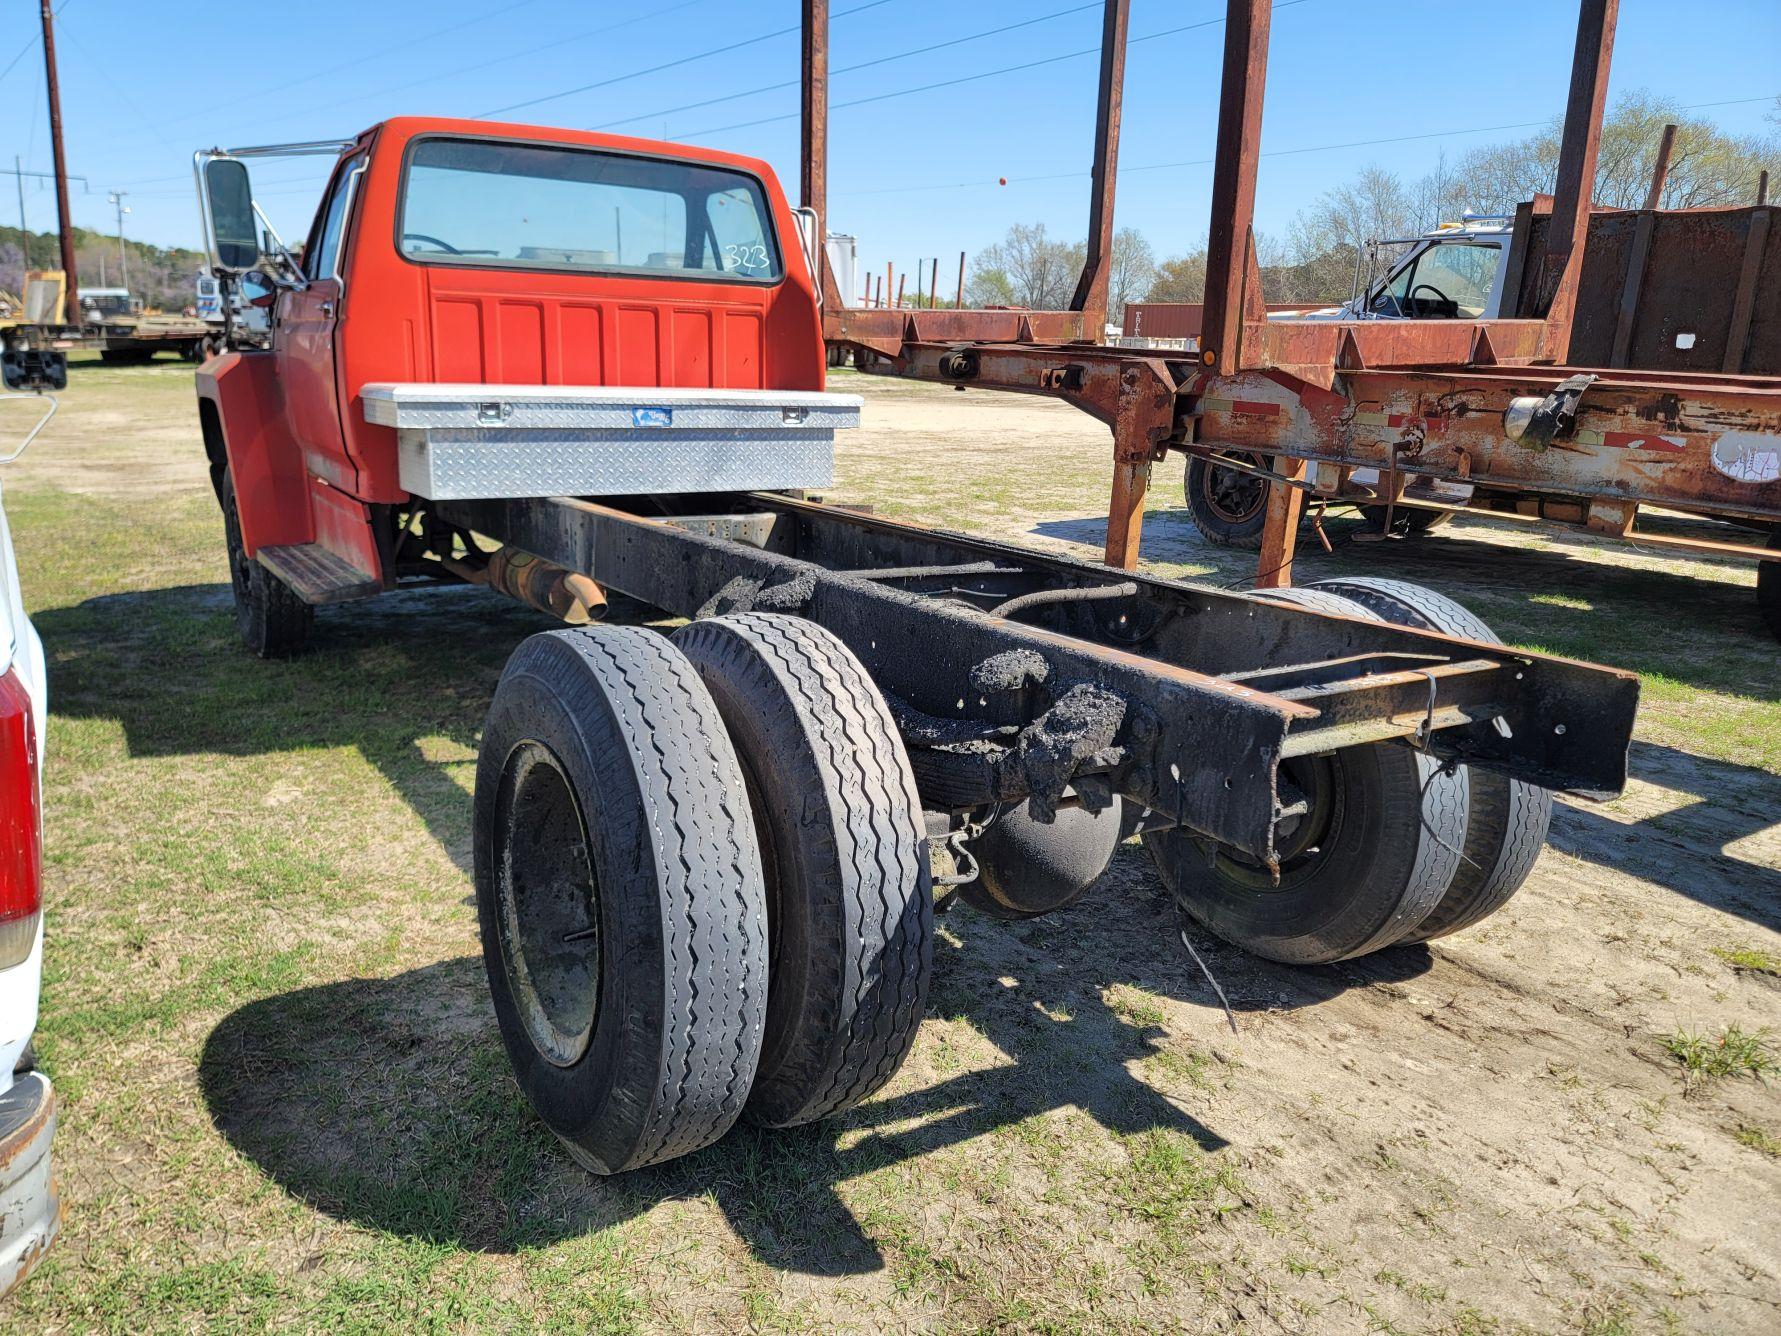 1987 FORD F700 Cab & Chassis, 370 gas engine, 4spd high & low, double frame